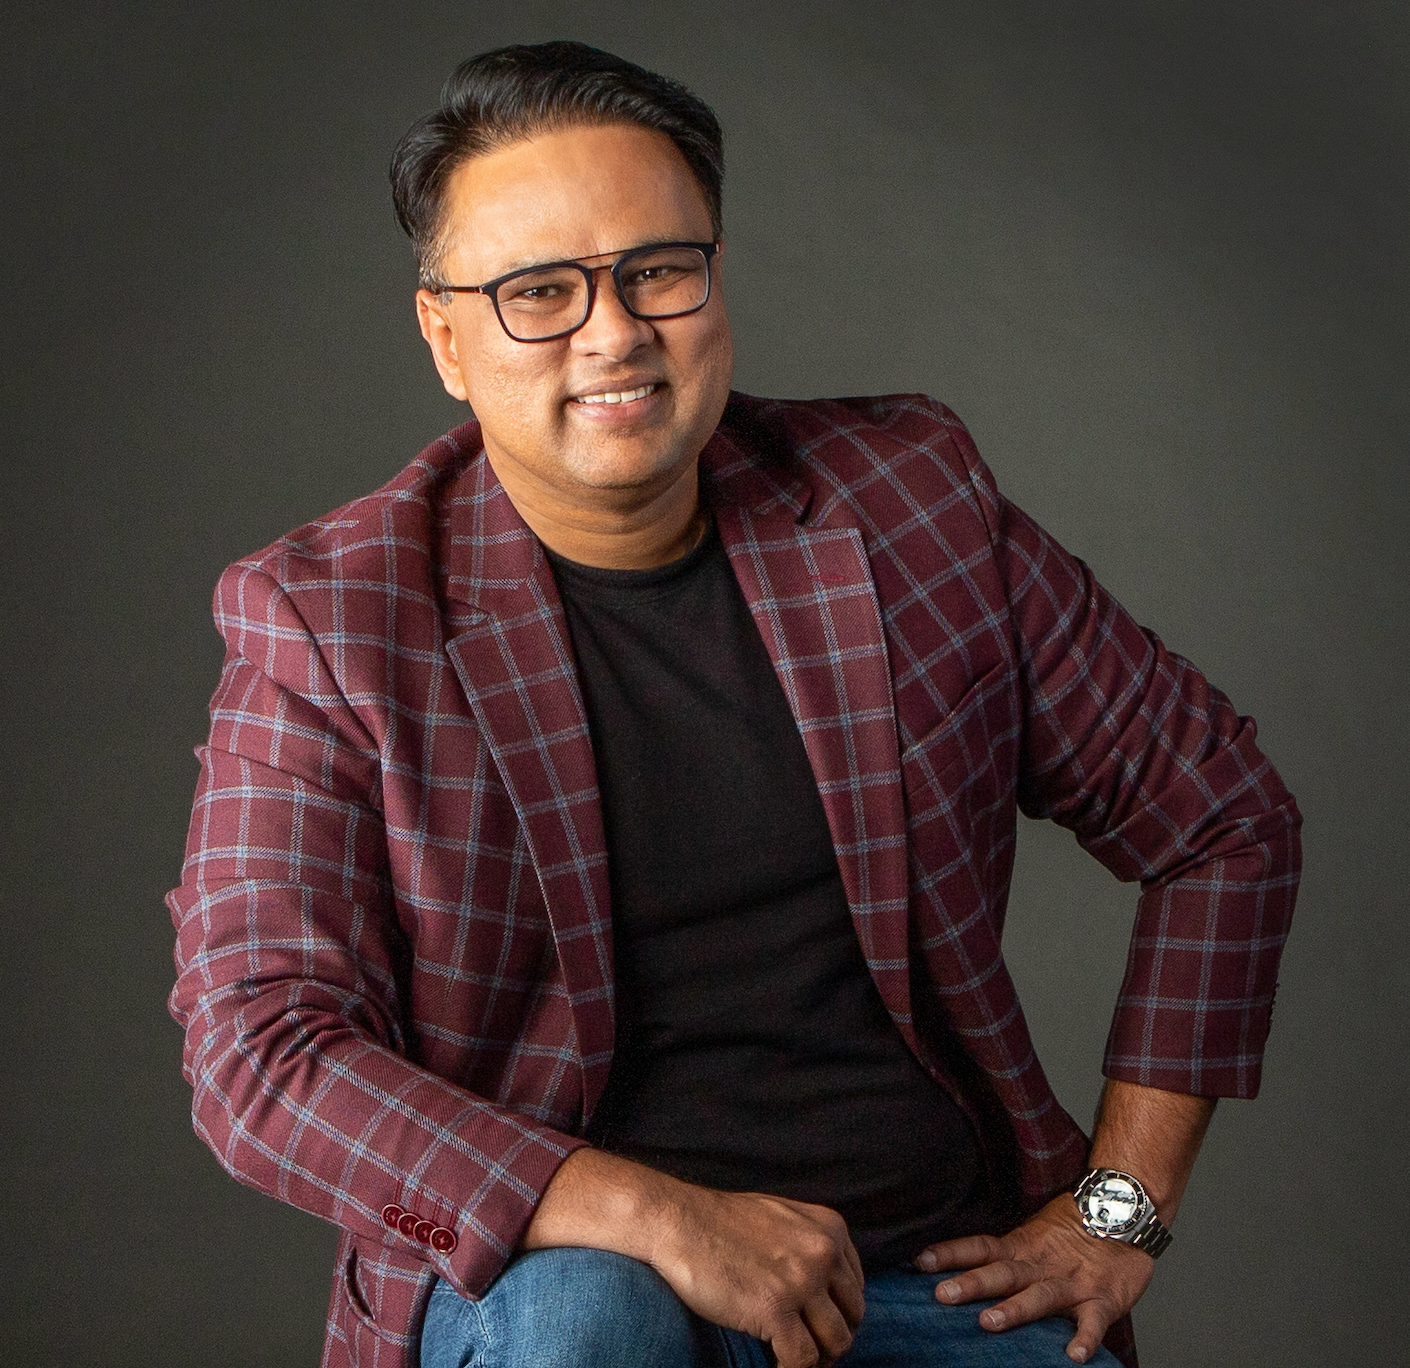 Harshit Jain MD, Founder and Global CEO, Doceree